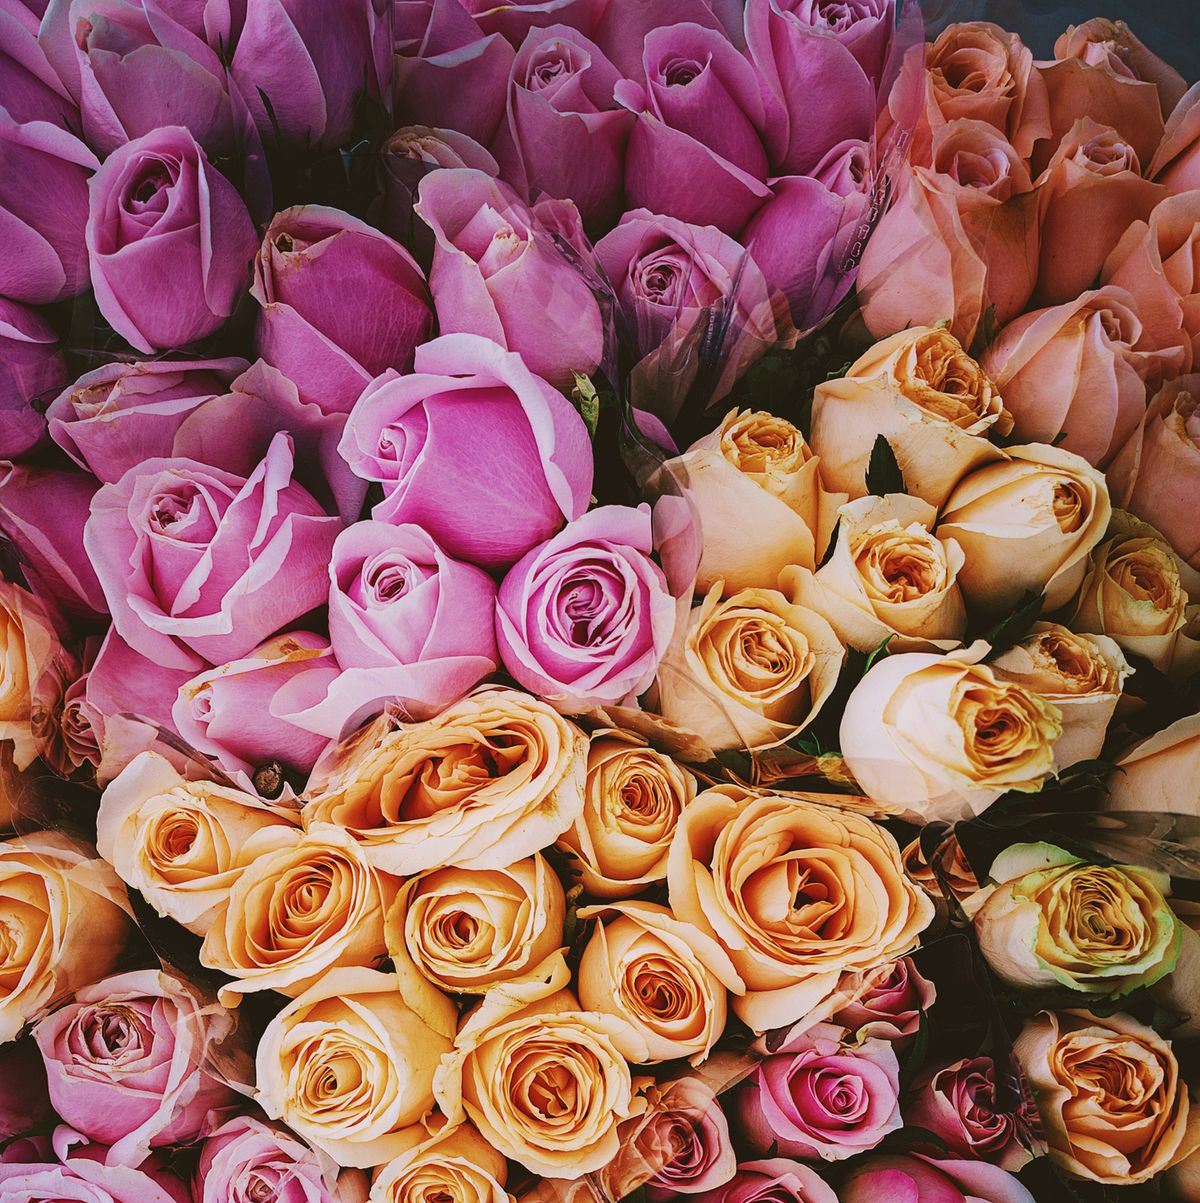 11 Rose Colors and Meanings to Know Before Sending a Bouquet